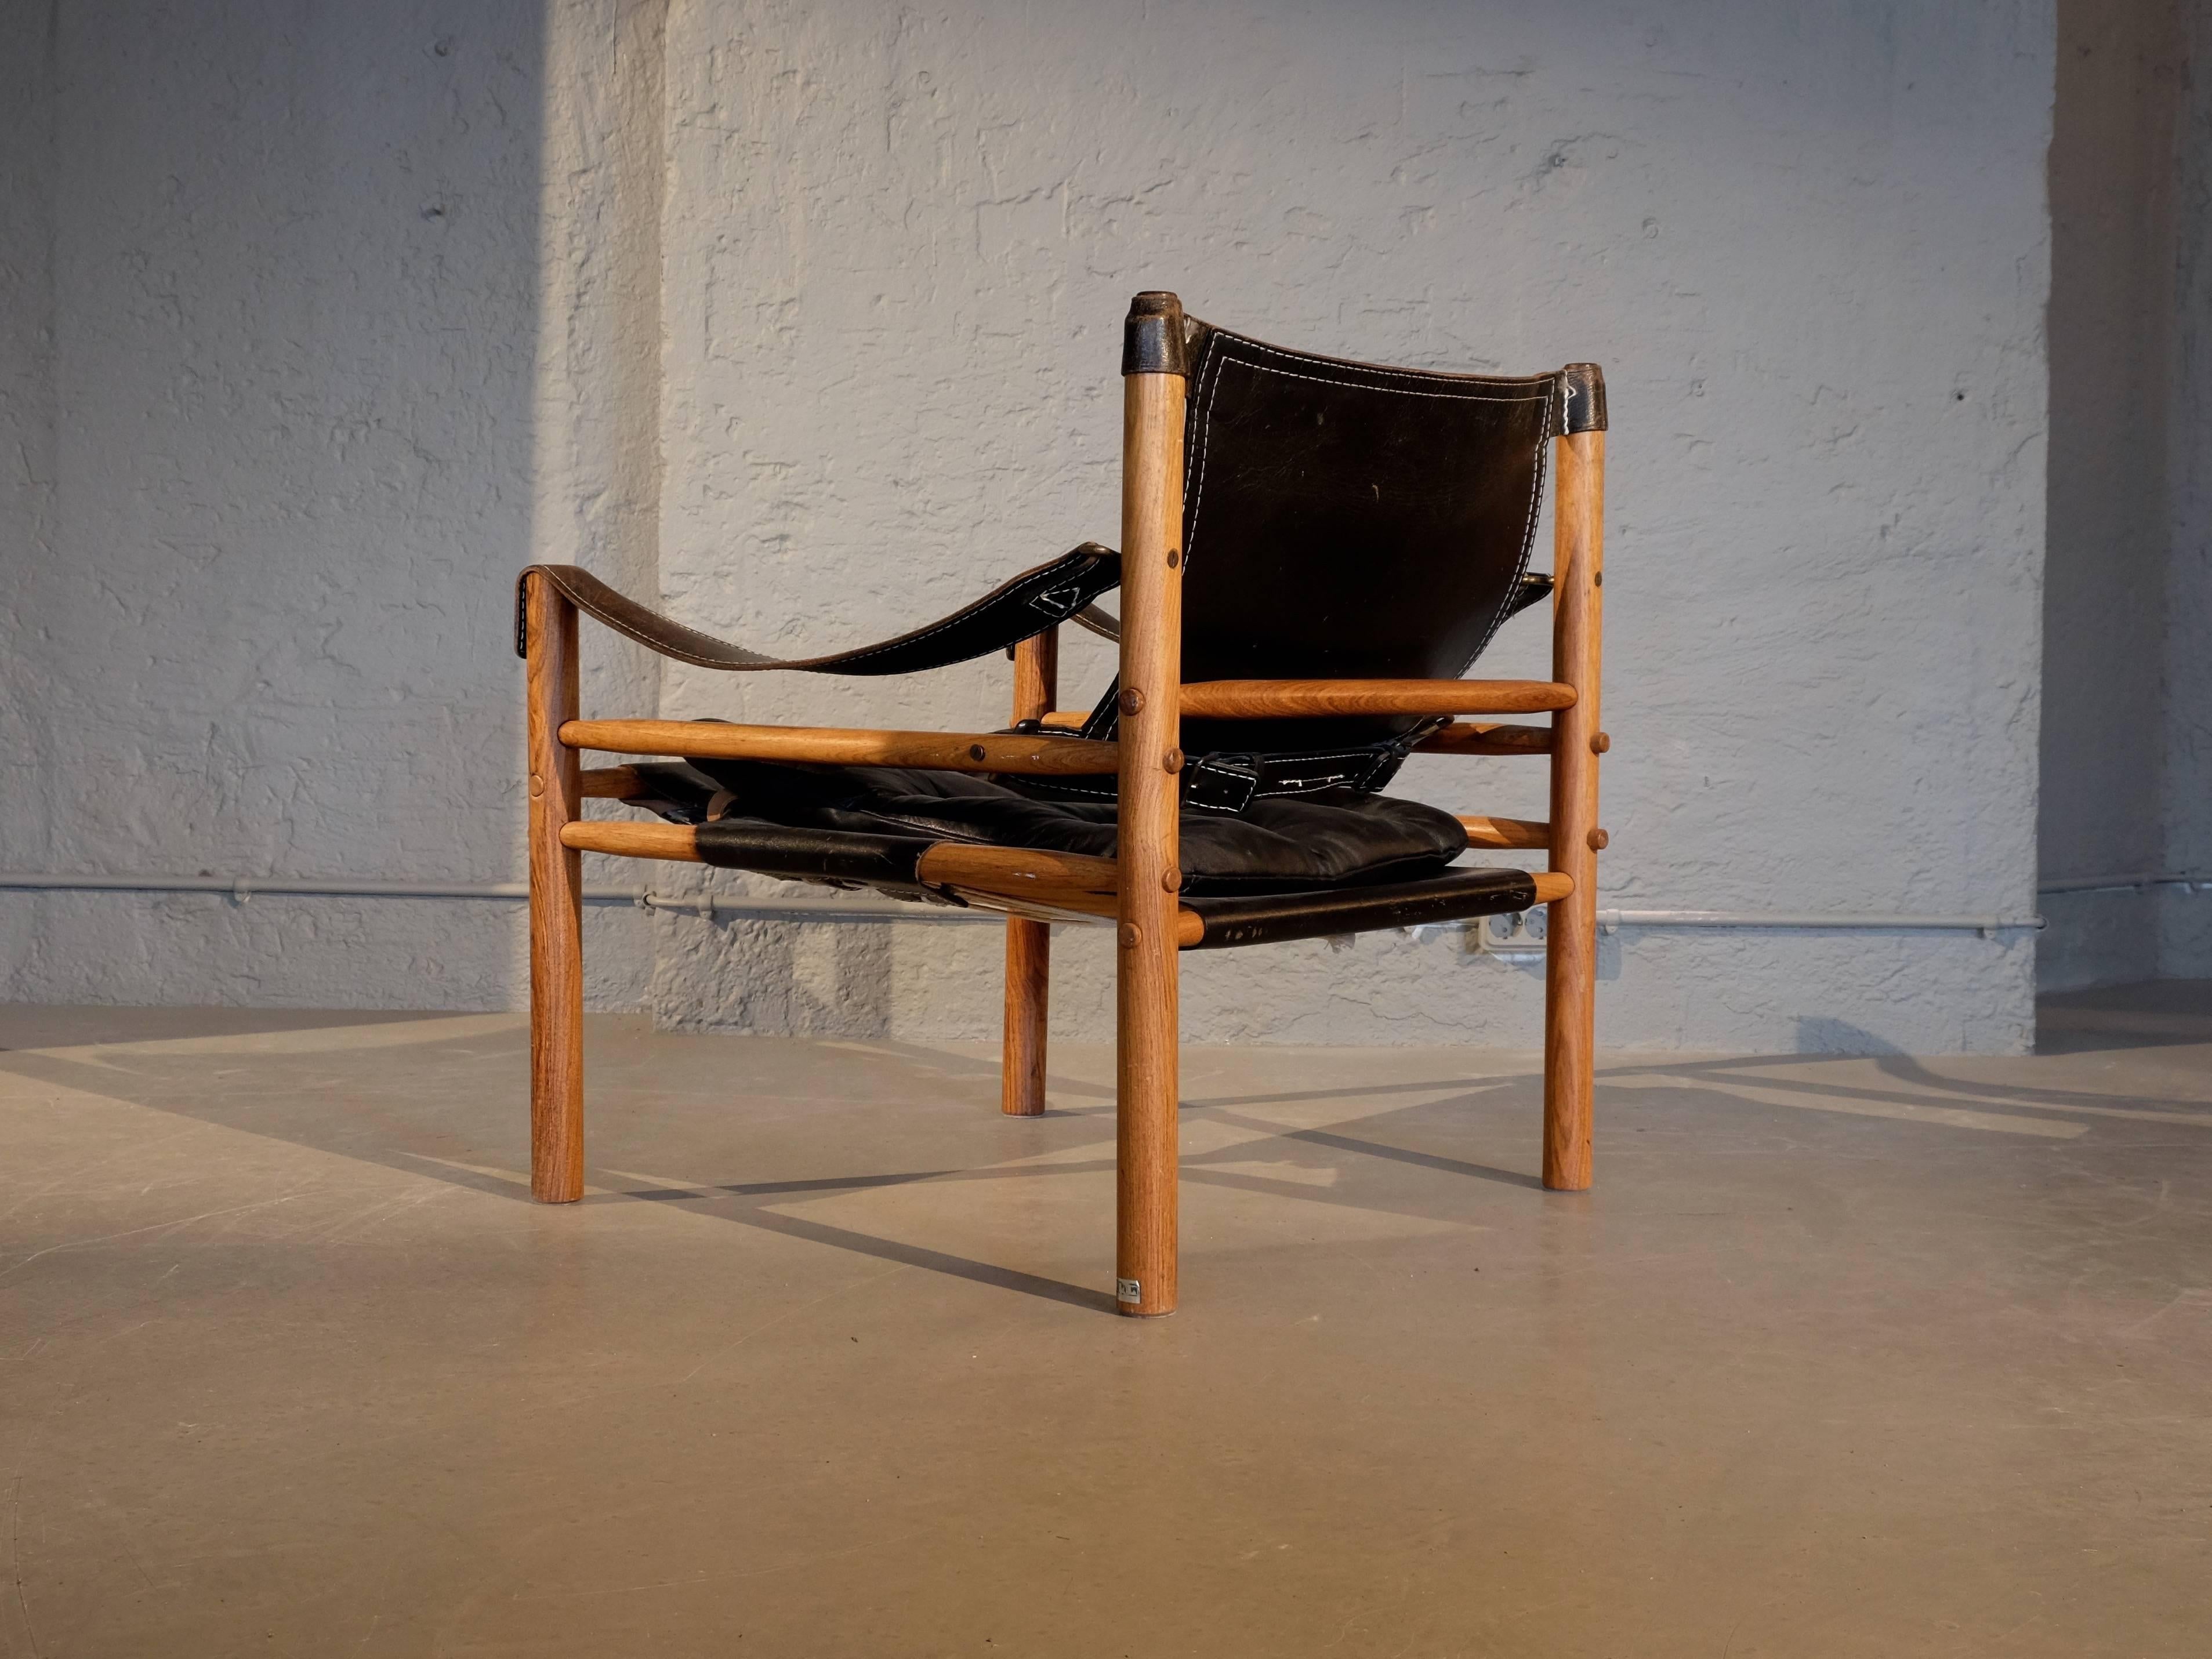 Lovely safari chair or easy chair in black leather and rosewood designed by Arne Norell, 1964, produced by Arne Norell AB in Aneby, Sweden, 1960s.
 